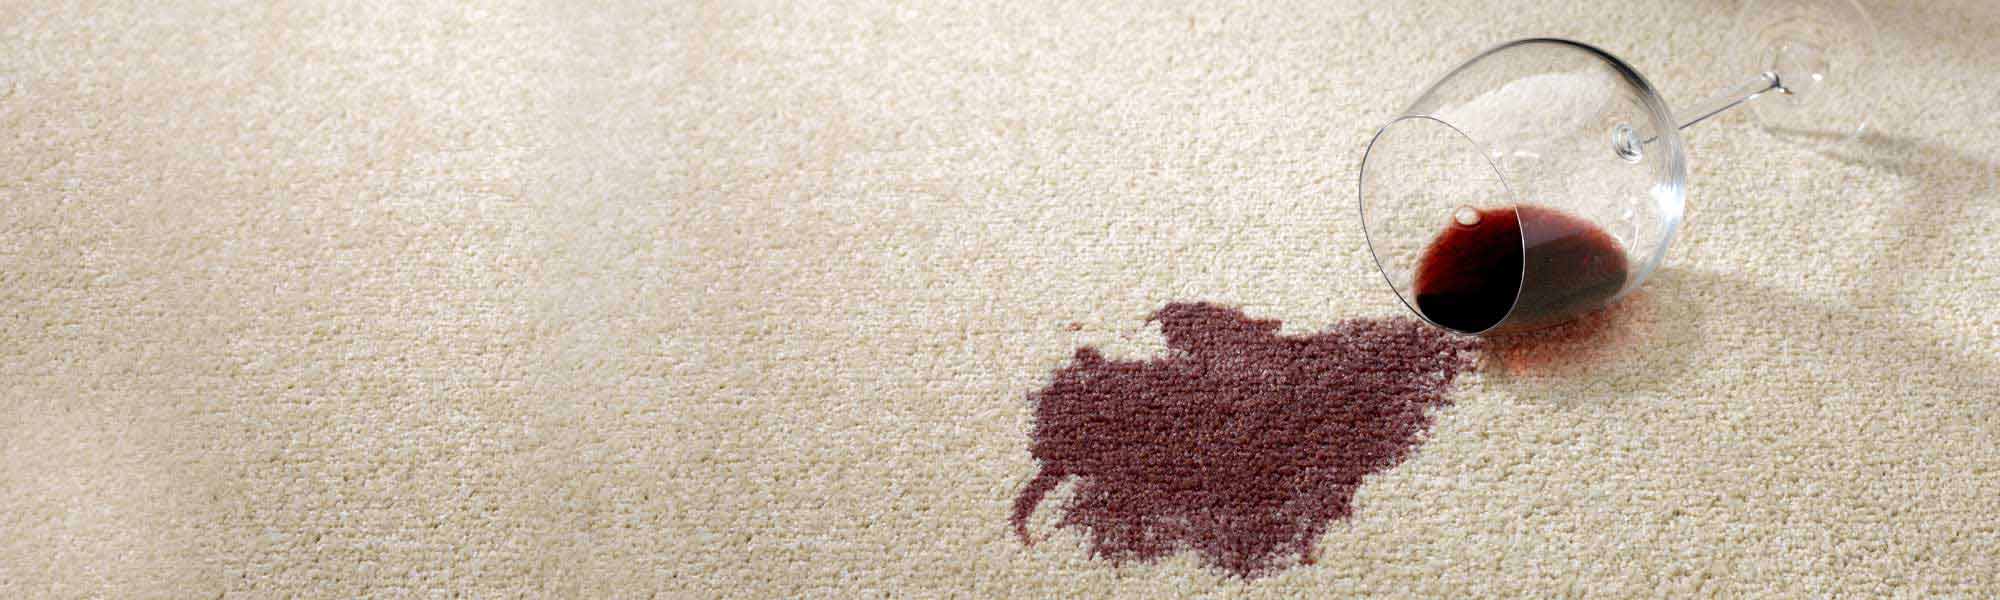 Professional Stain Removal Service by A+ Chem-Dry in El Paso